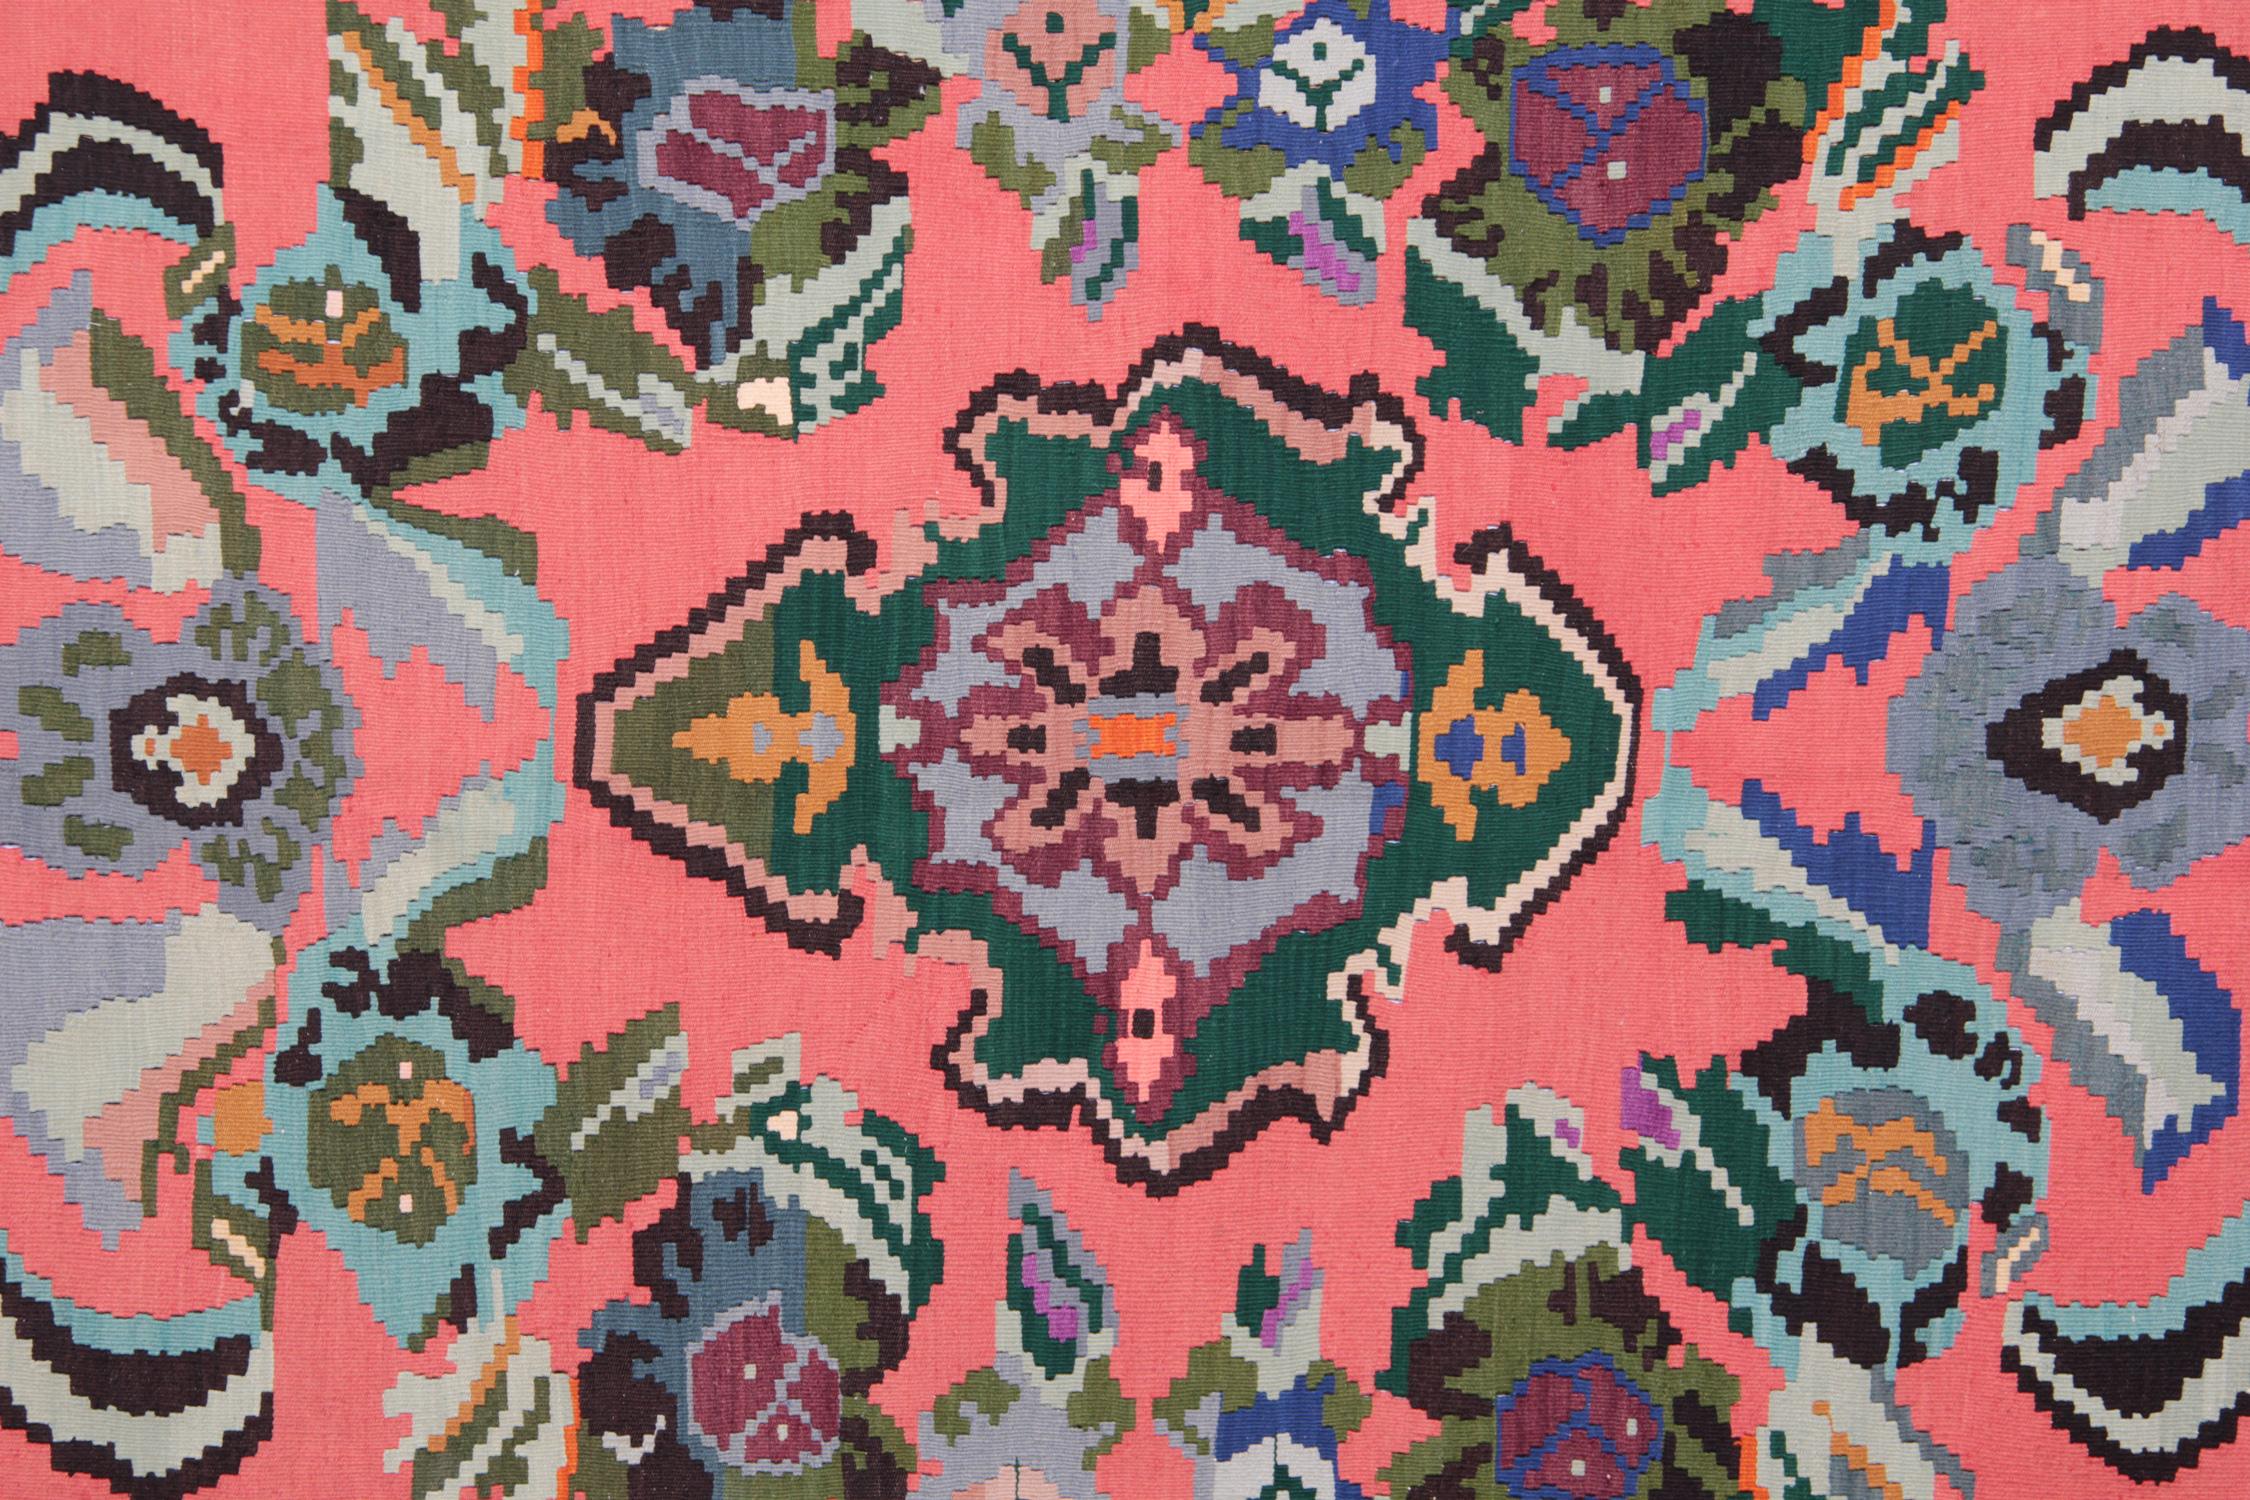 This handmade carpet colourful Turkish carpet rug is woven by very skilled weavers in Turkey, who use the highest quality wool and cotton. The flat-weave rug has light blue, orange Salmon, green, white, pink, black and brown colours. The pink rug